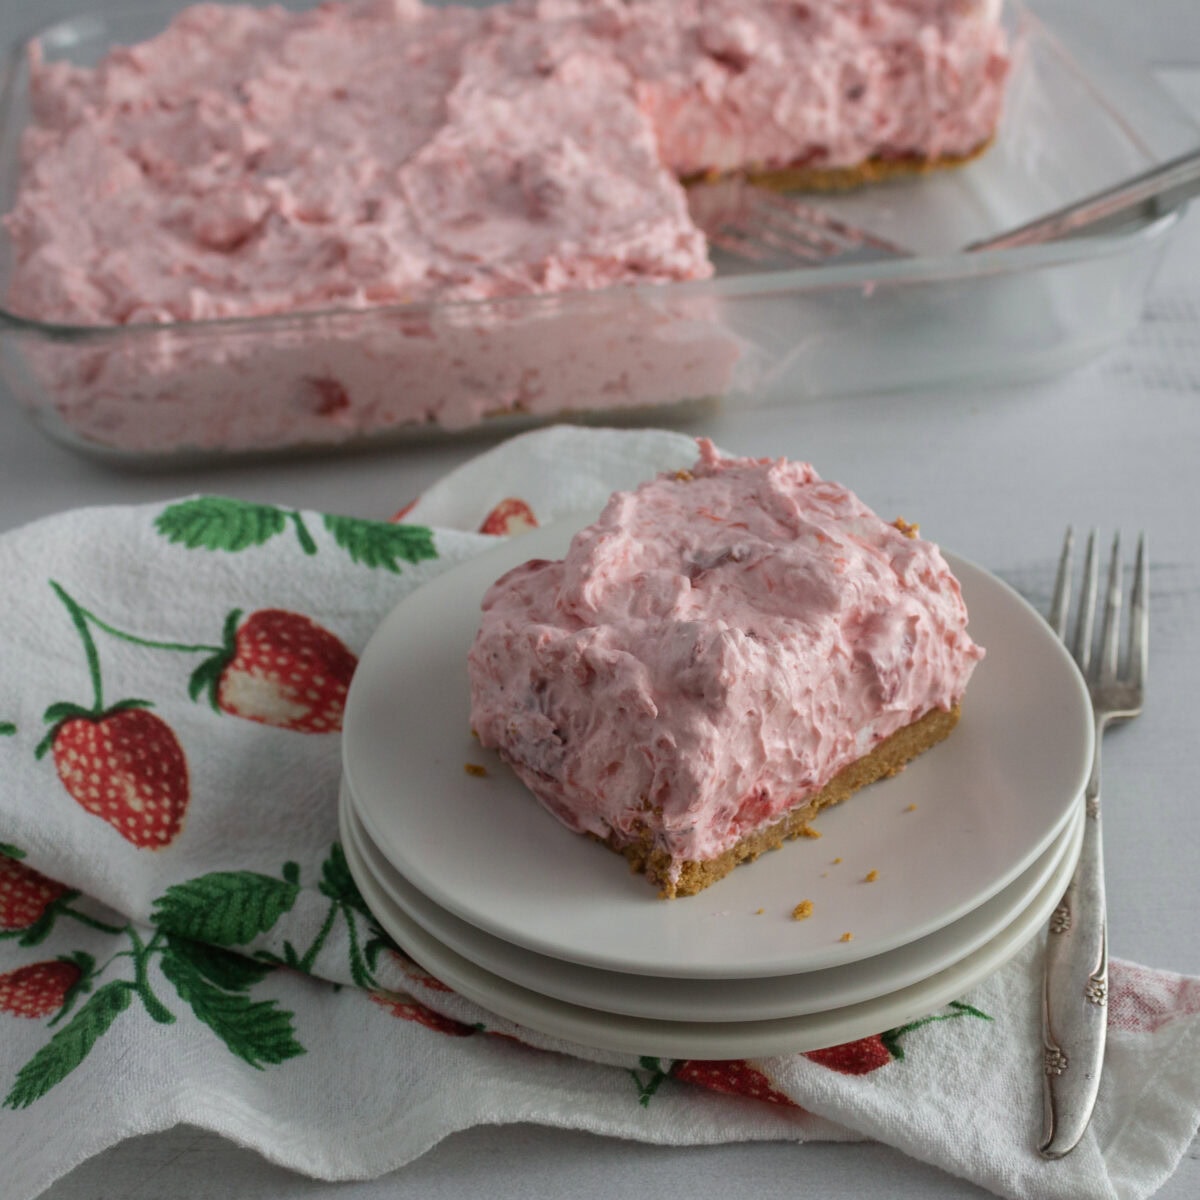 Slice of pink whipped cream dessert on plate.